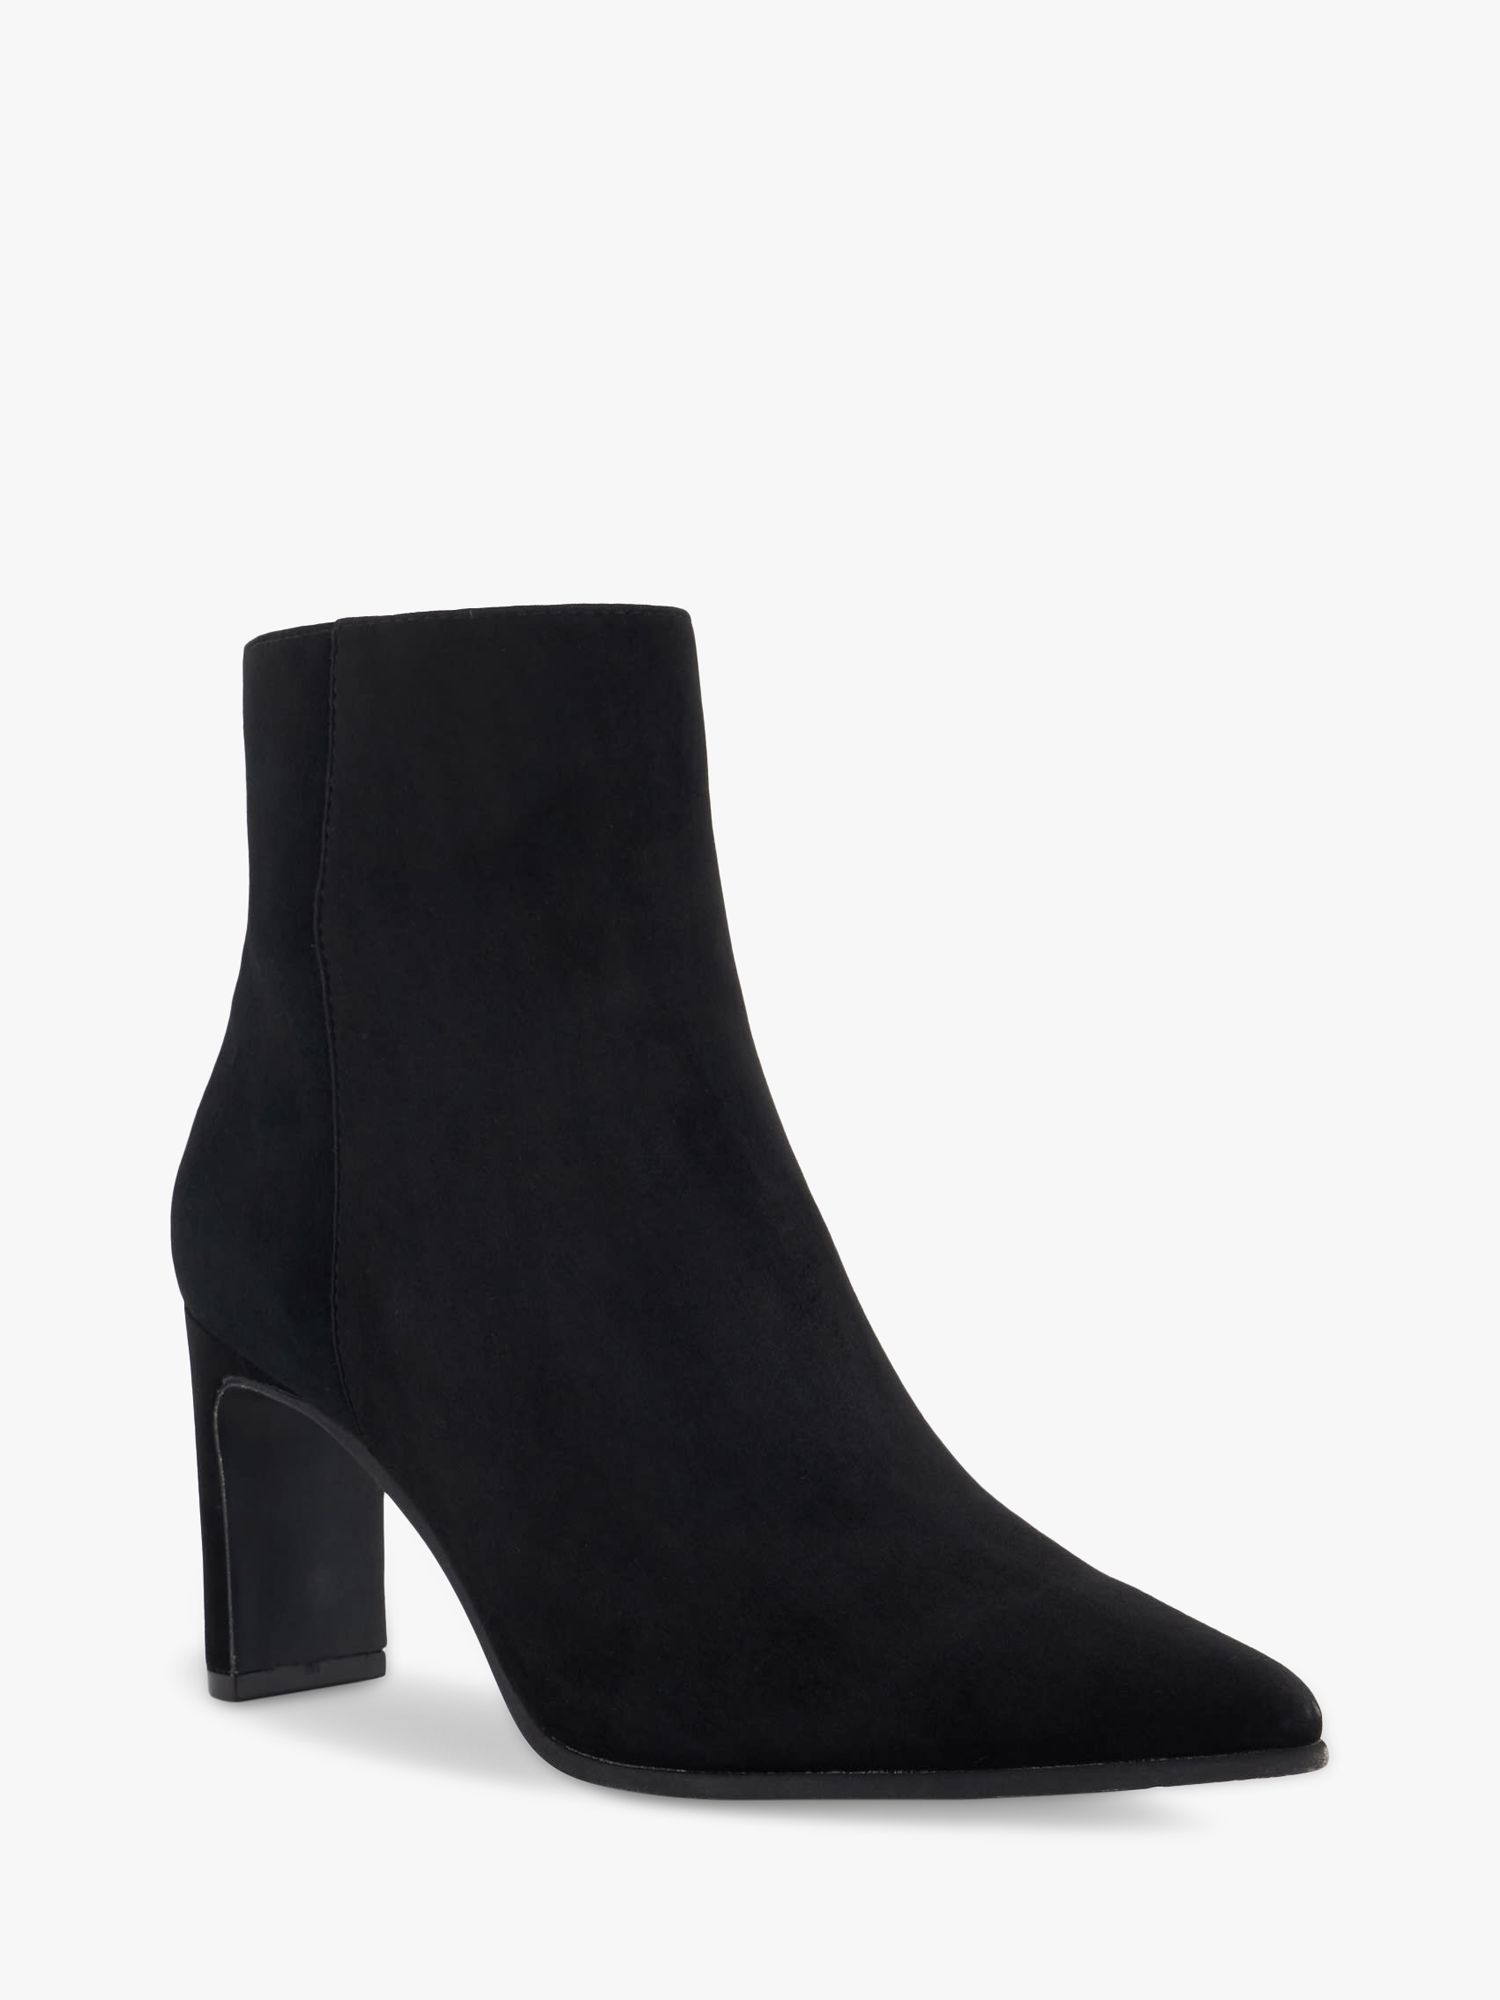 Dune Ottaly Suede Pointed Toe Ankle Boots, Black-suede at John Lewis ...